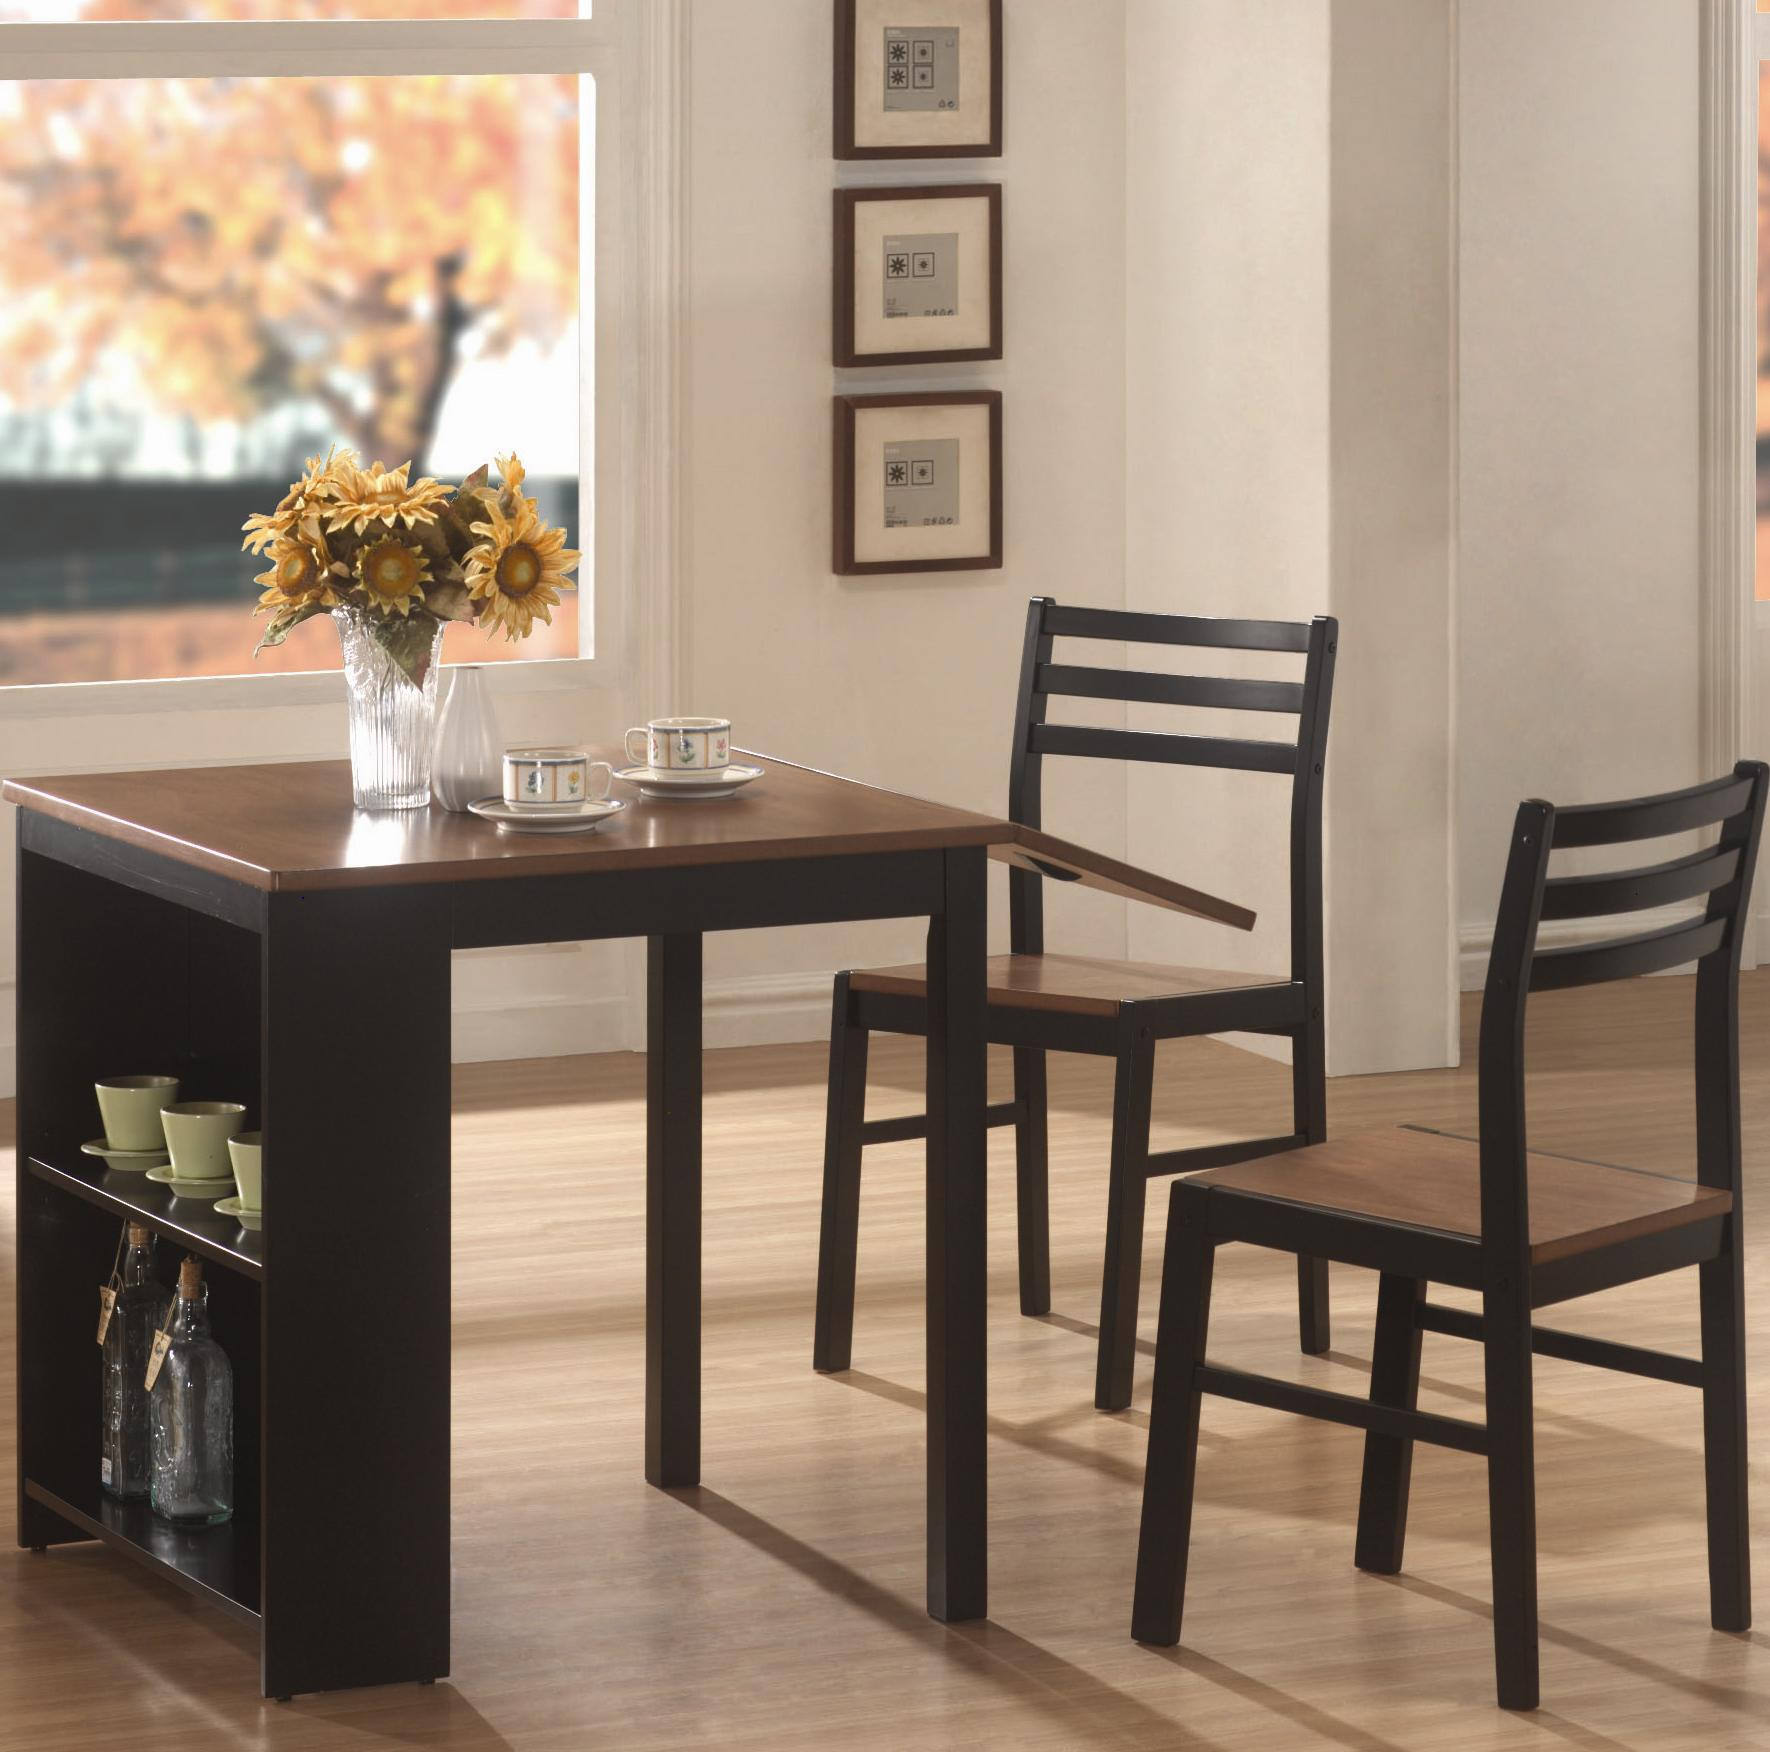 Small Rectangular Kitchen Table Sets
 Small Rectangular Kitchen Table